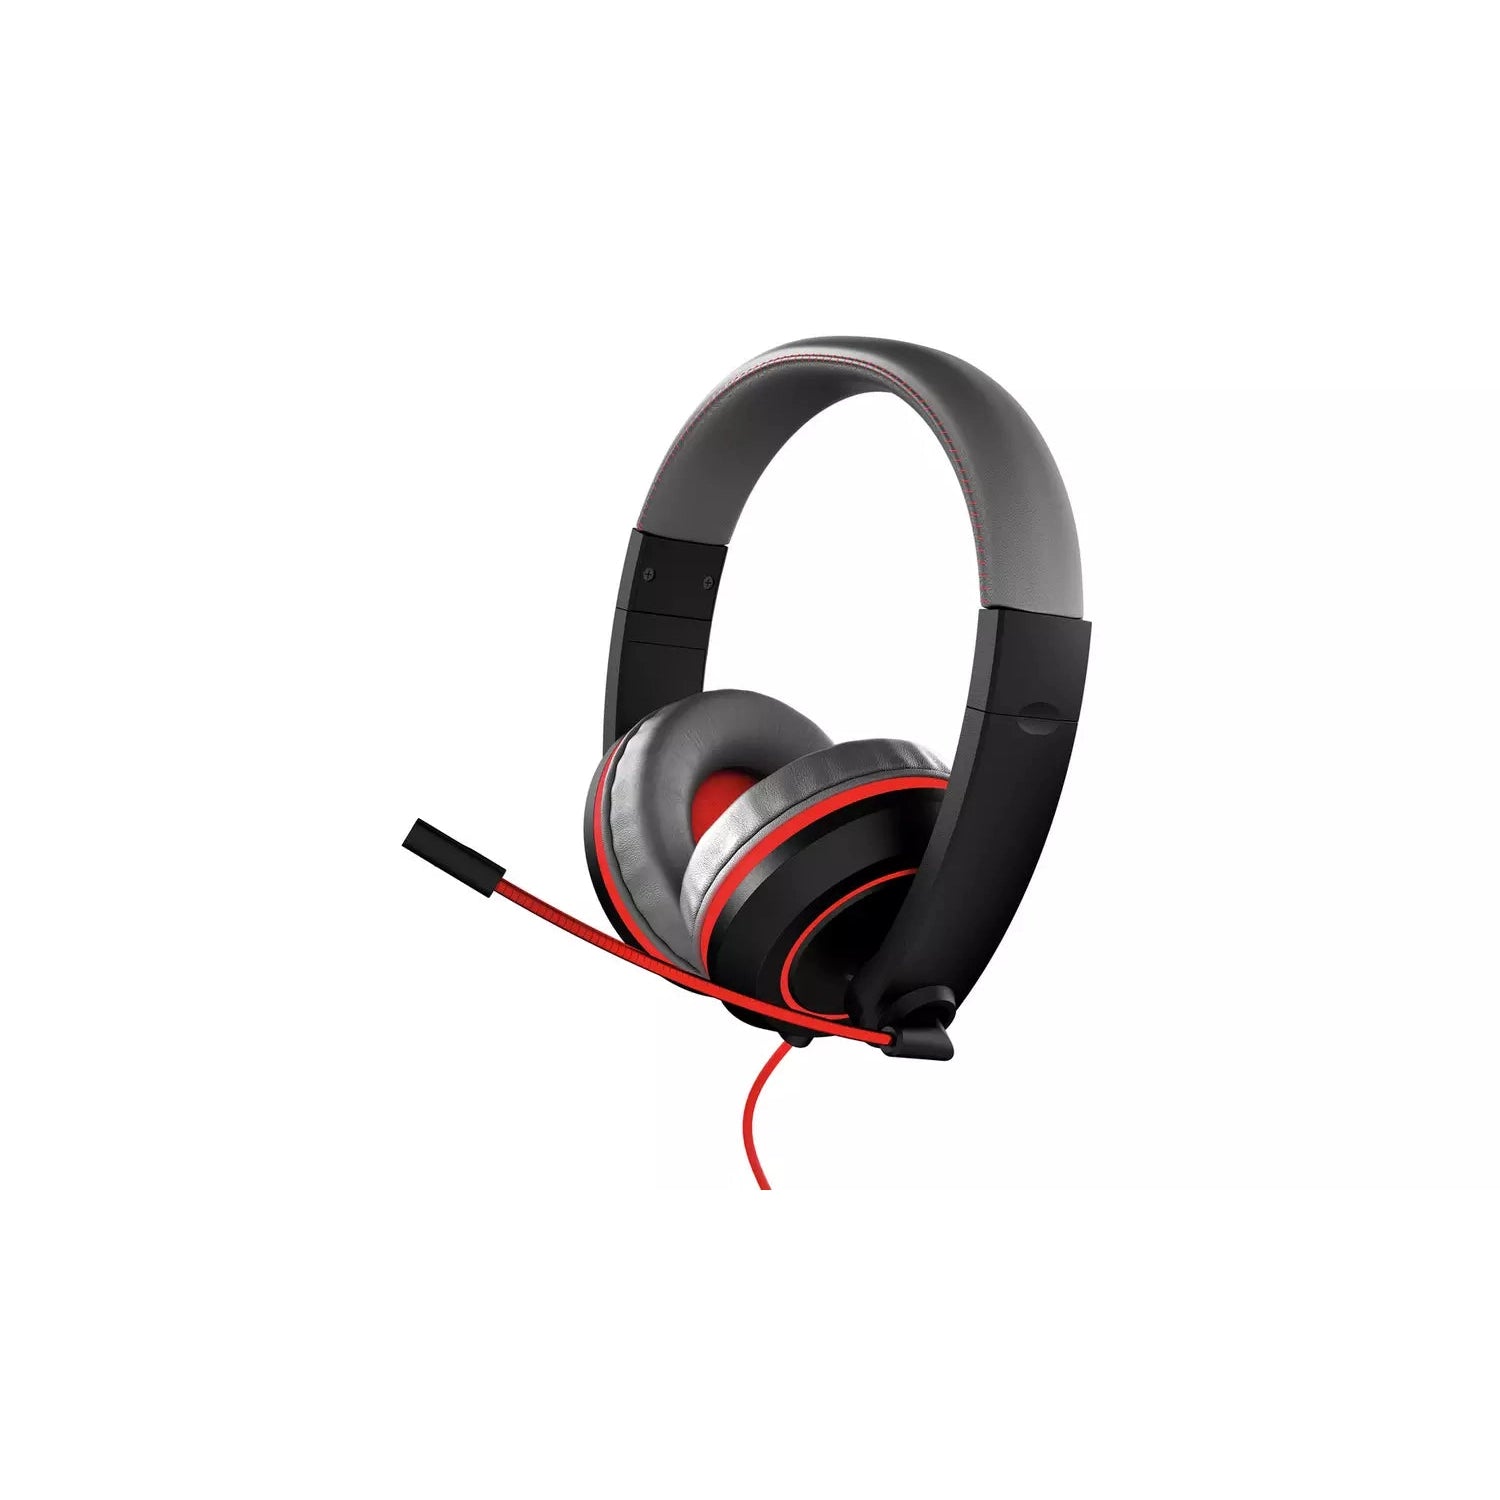 Gioteck XH-100S Stereo Gaming Headset - Refurbished Excellent